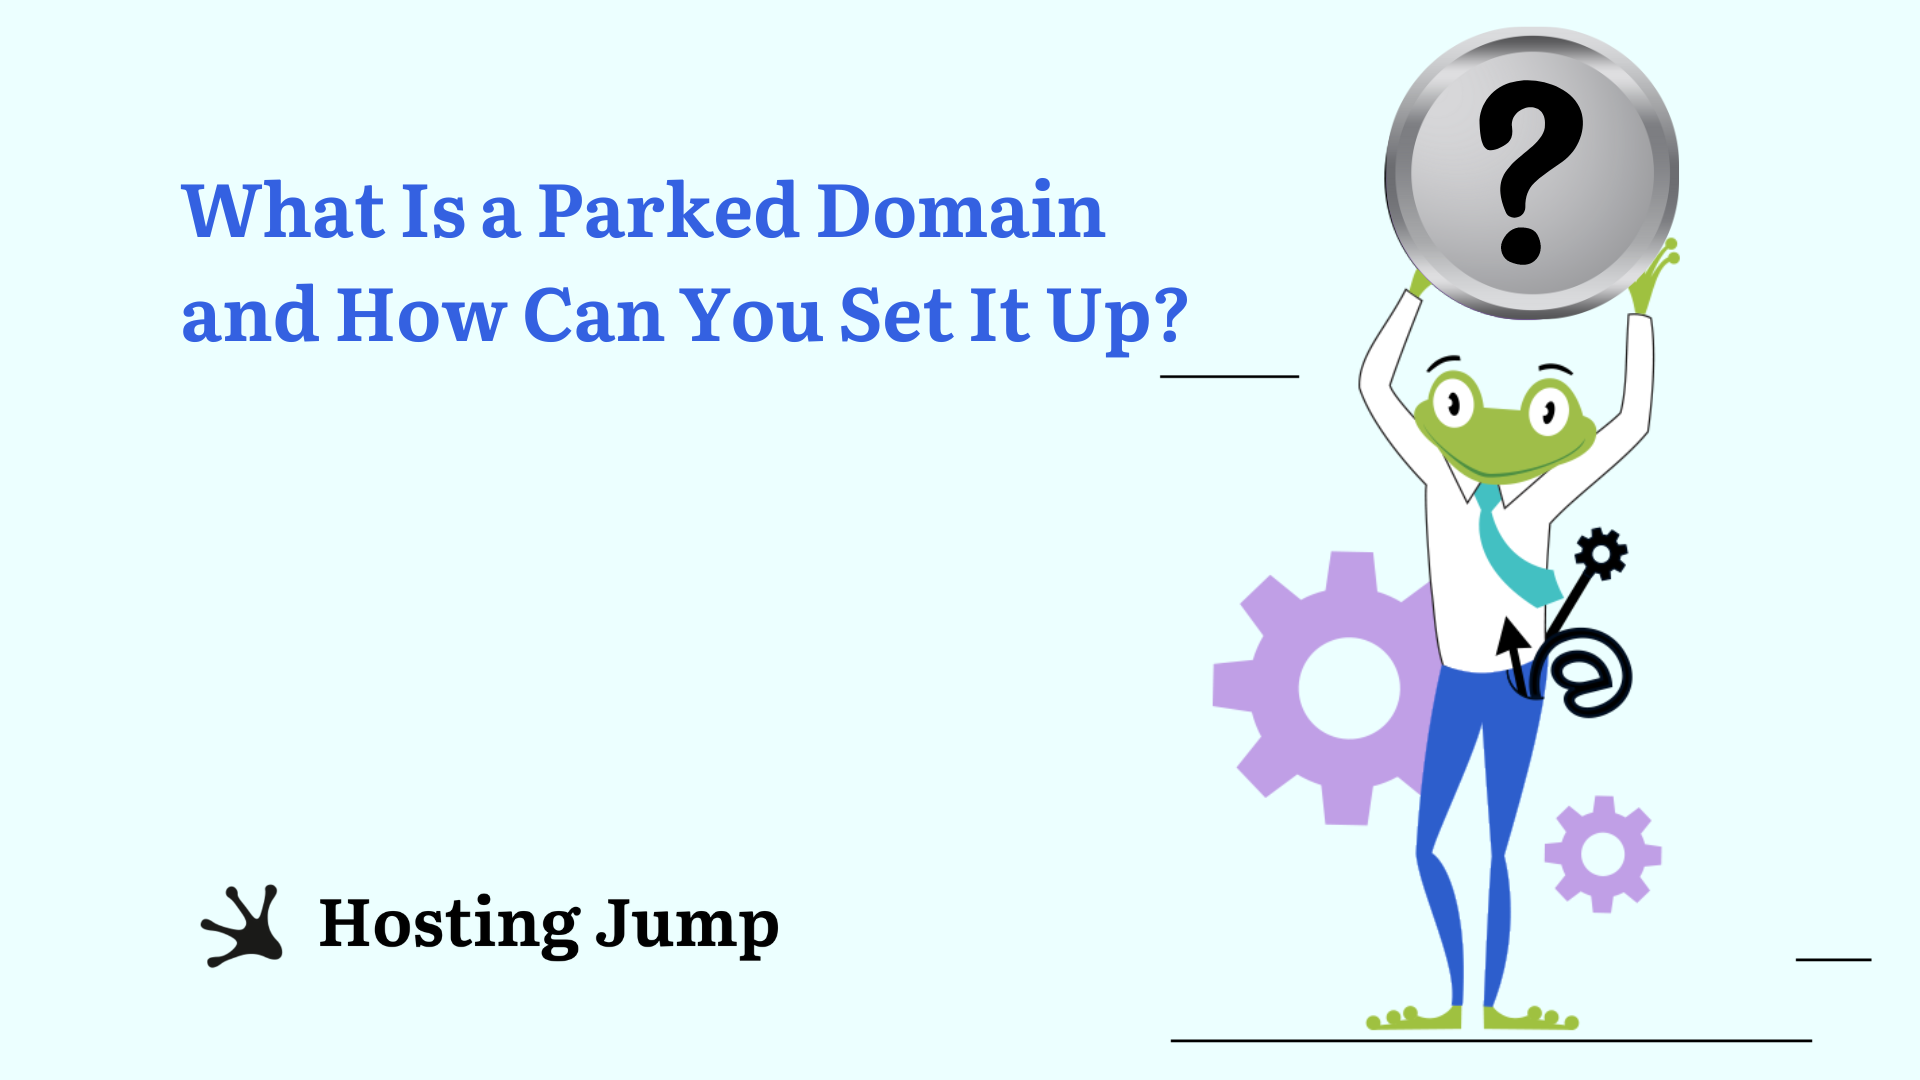 What Is a Parked Domain and How Can You Set It Up?